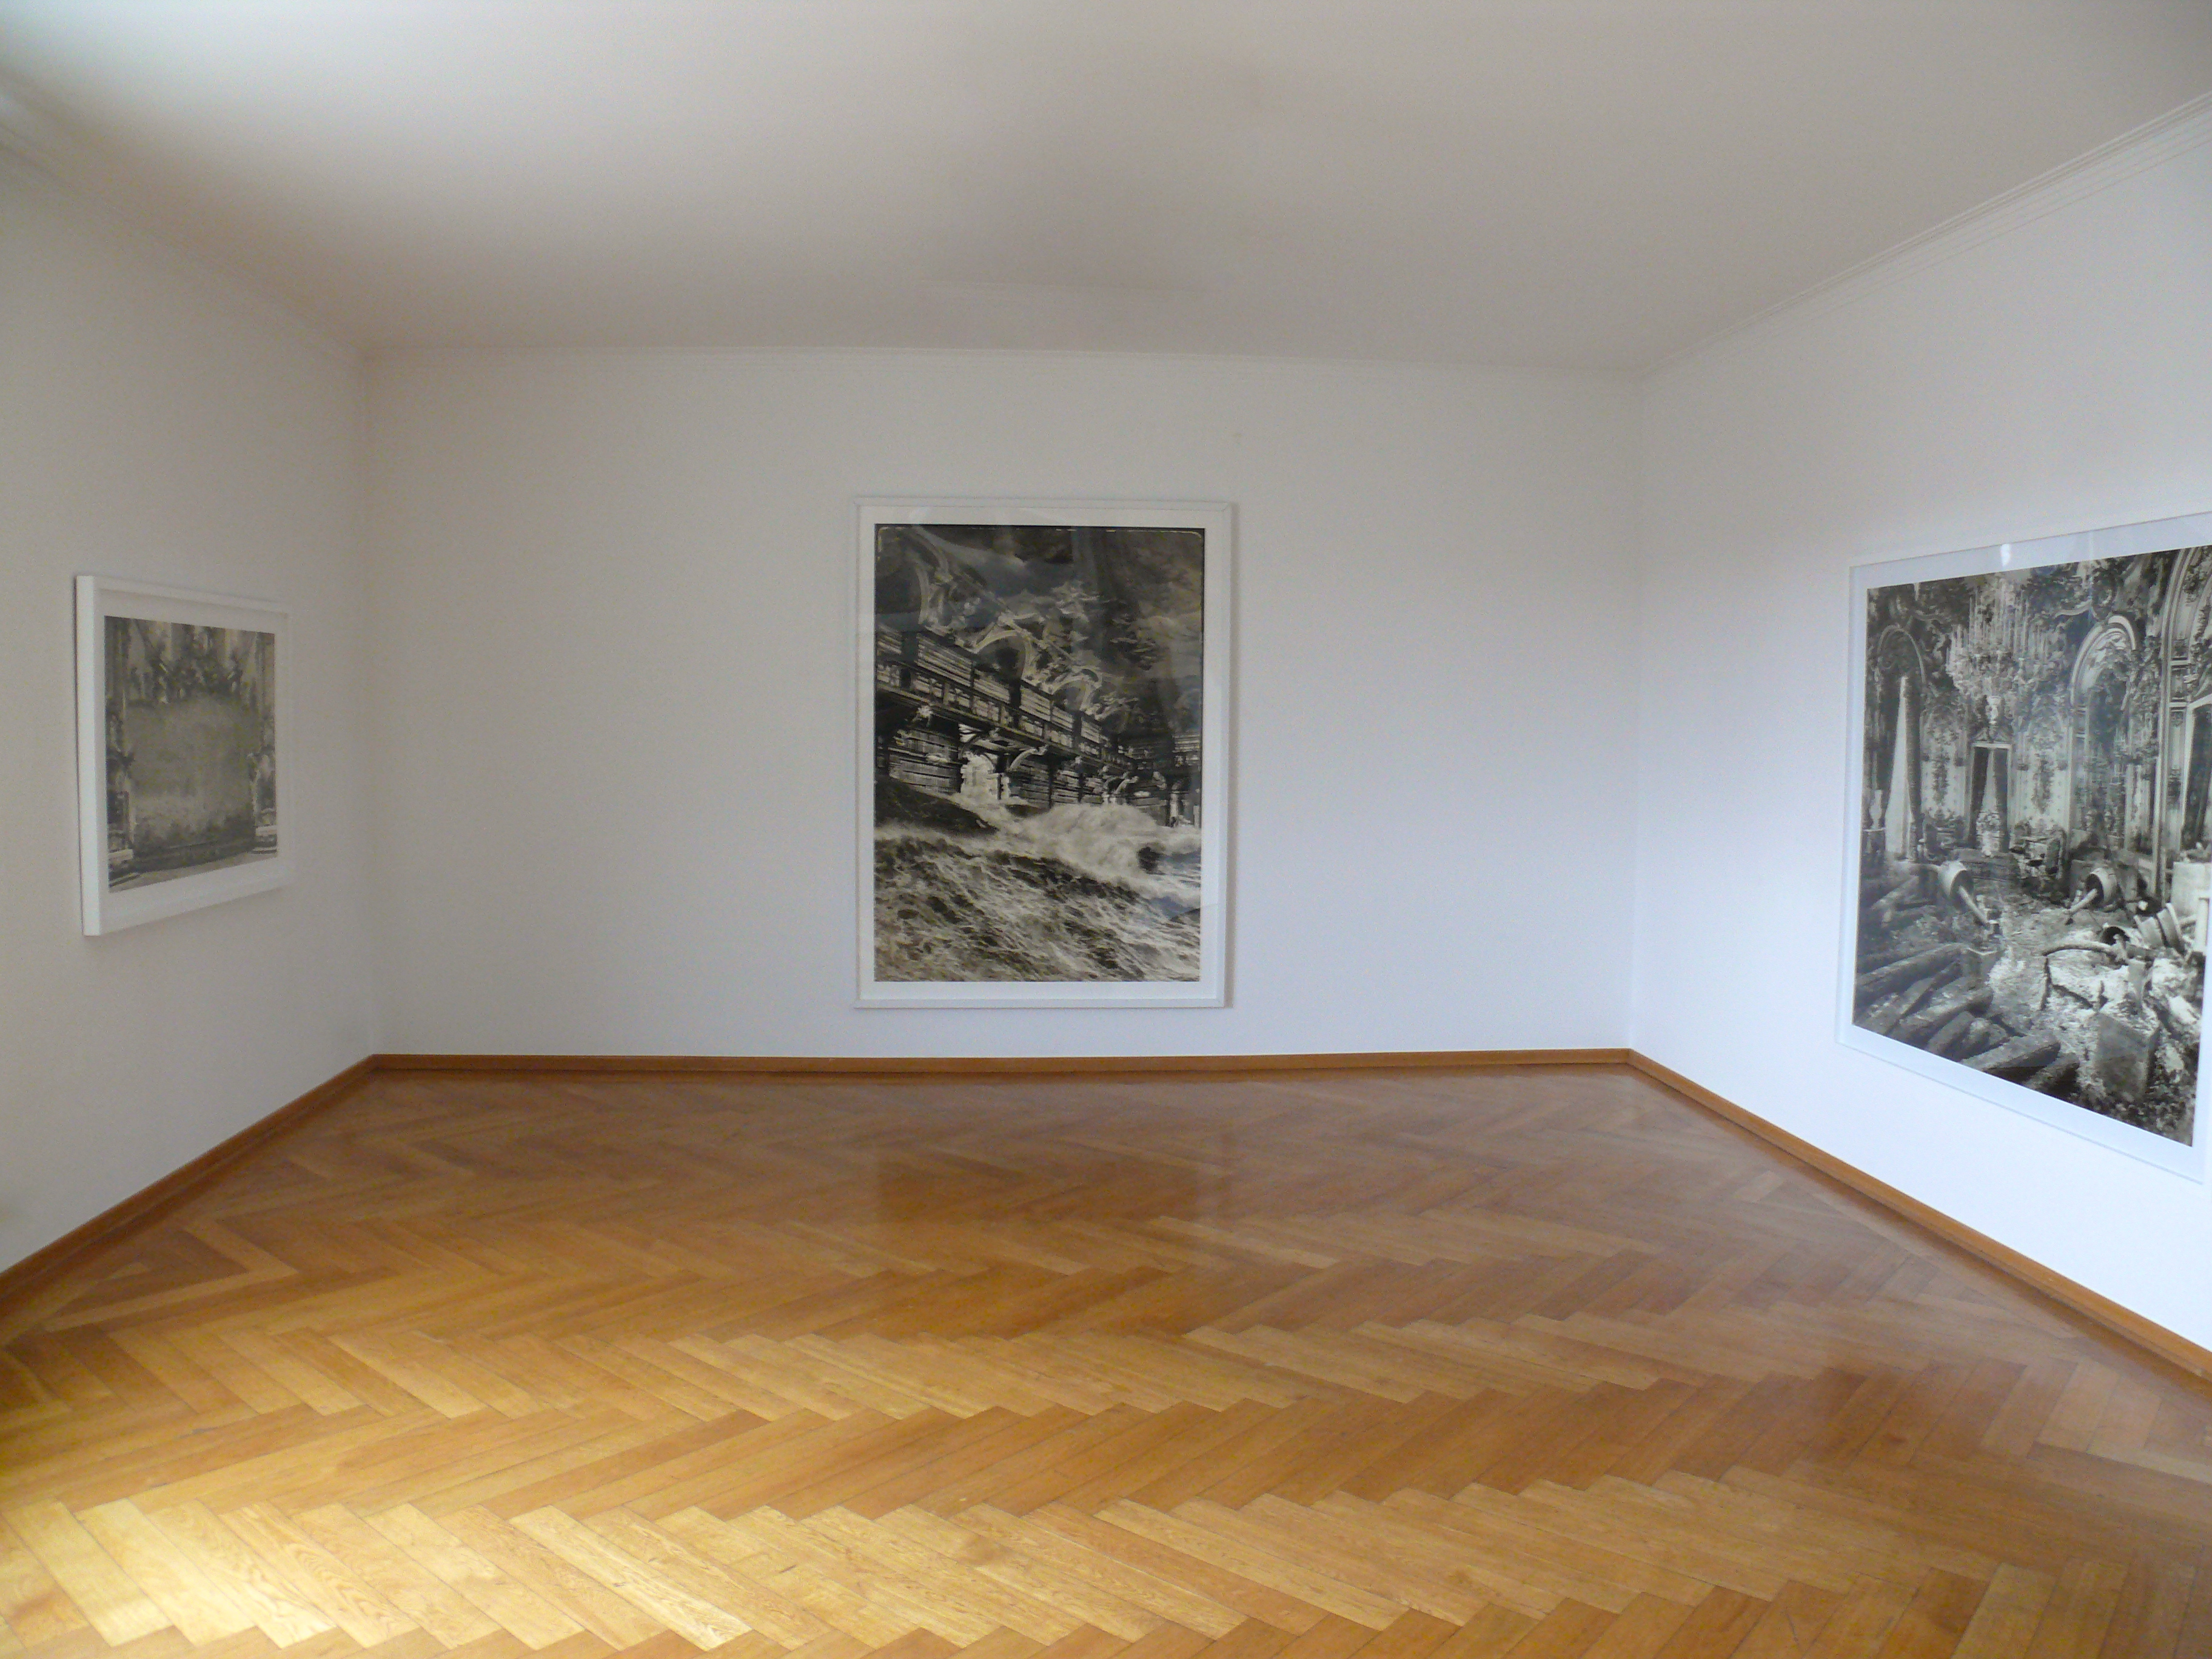 “Cronotados” by Pablo Genoves will be extended until March 29